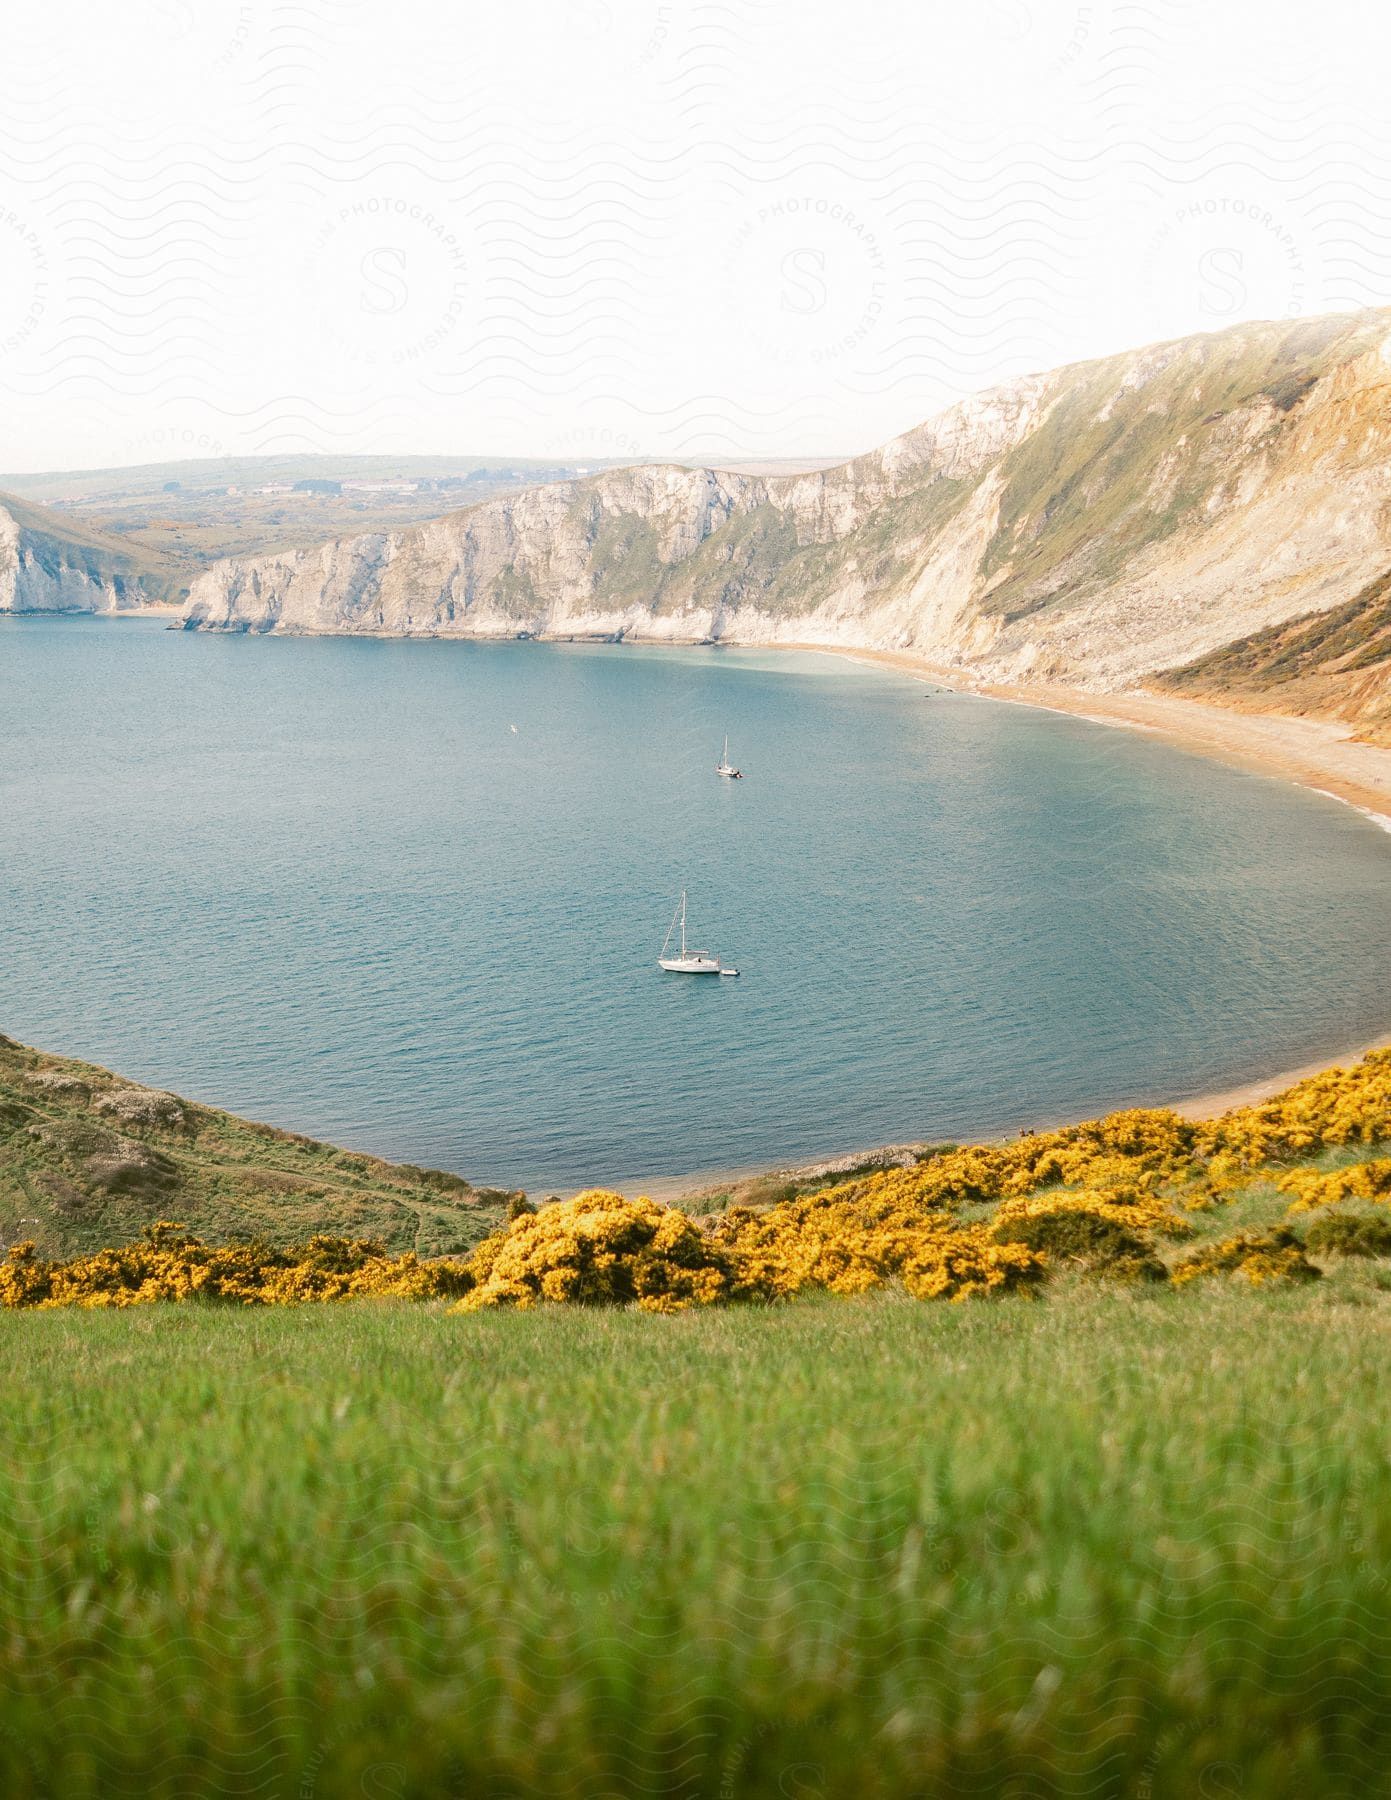 Bright green grass on the slope leading down to Worbarrow Bay where two sailboats are anchored near the beach